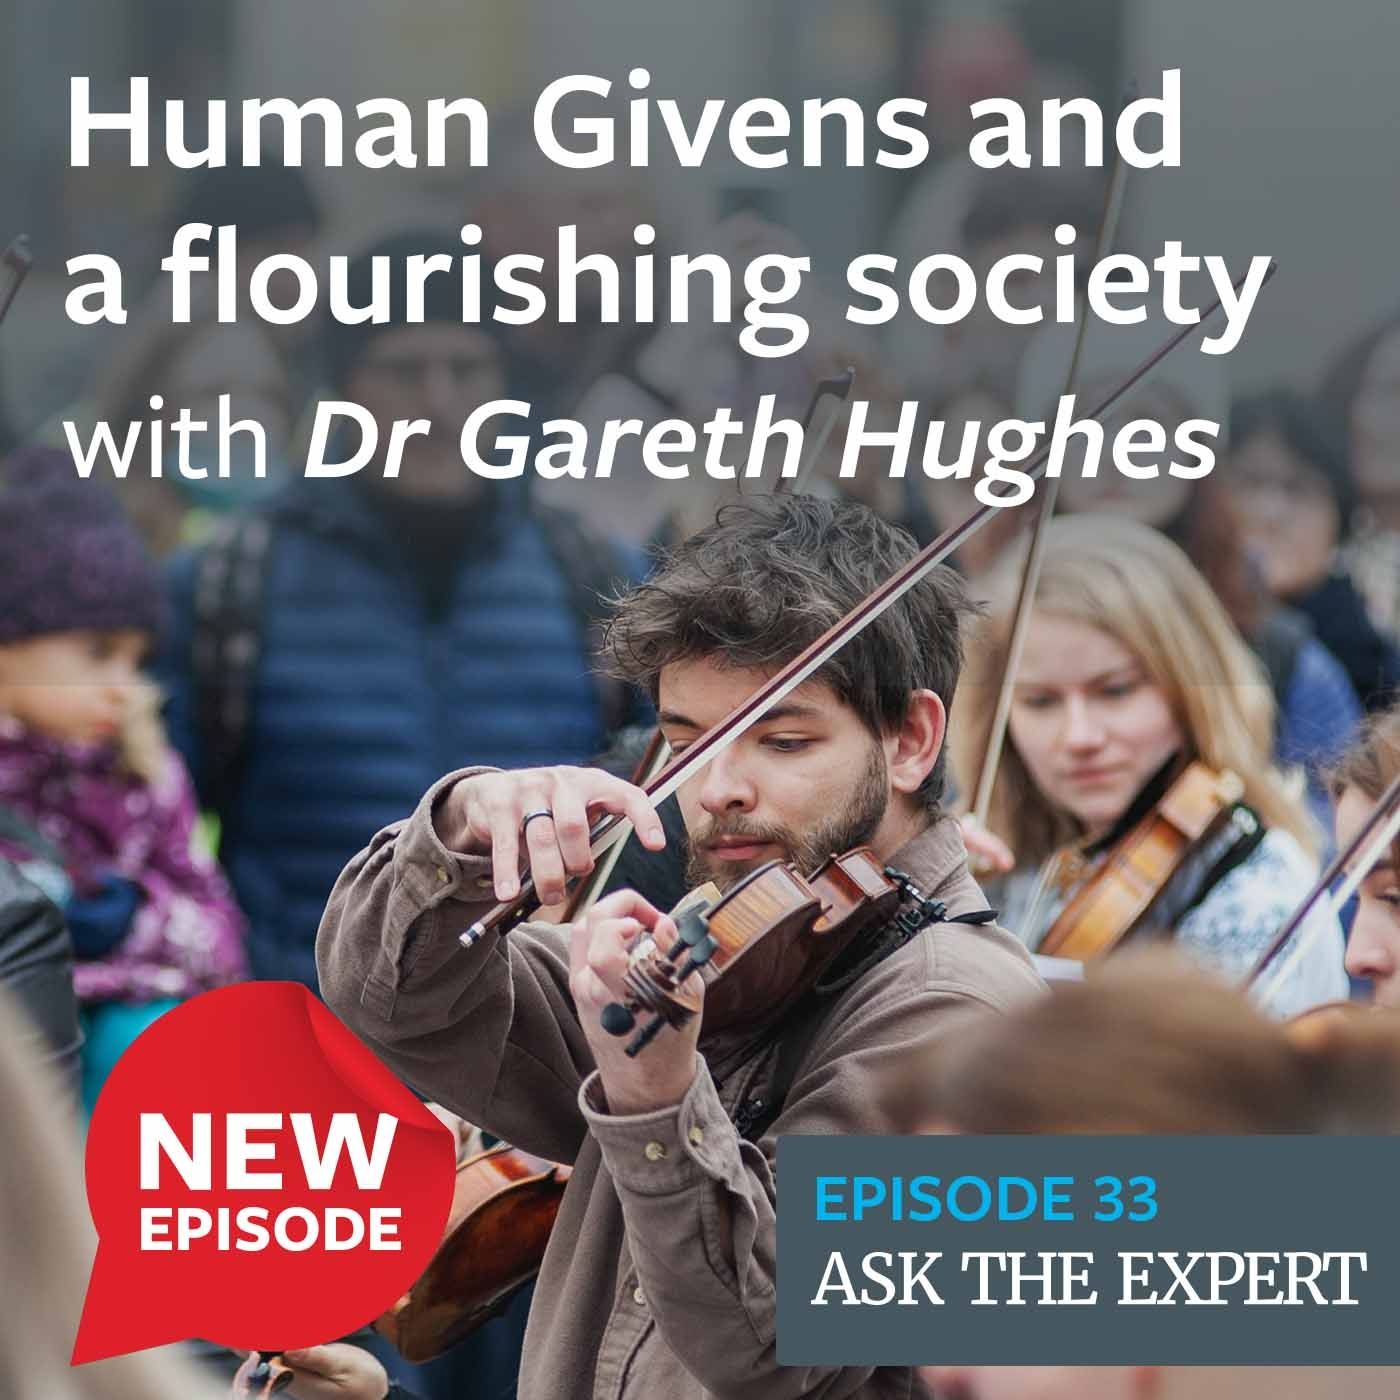 Human Givens Podcast - Episode 33 with Dr Gareth Hughes